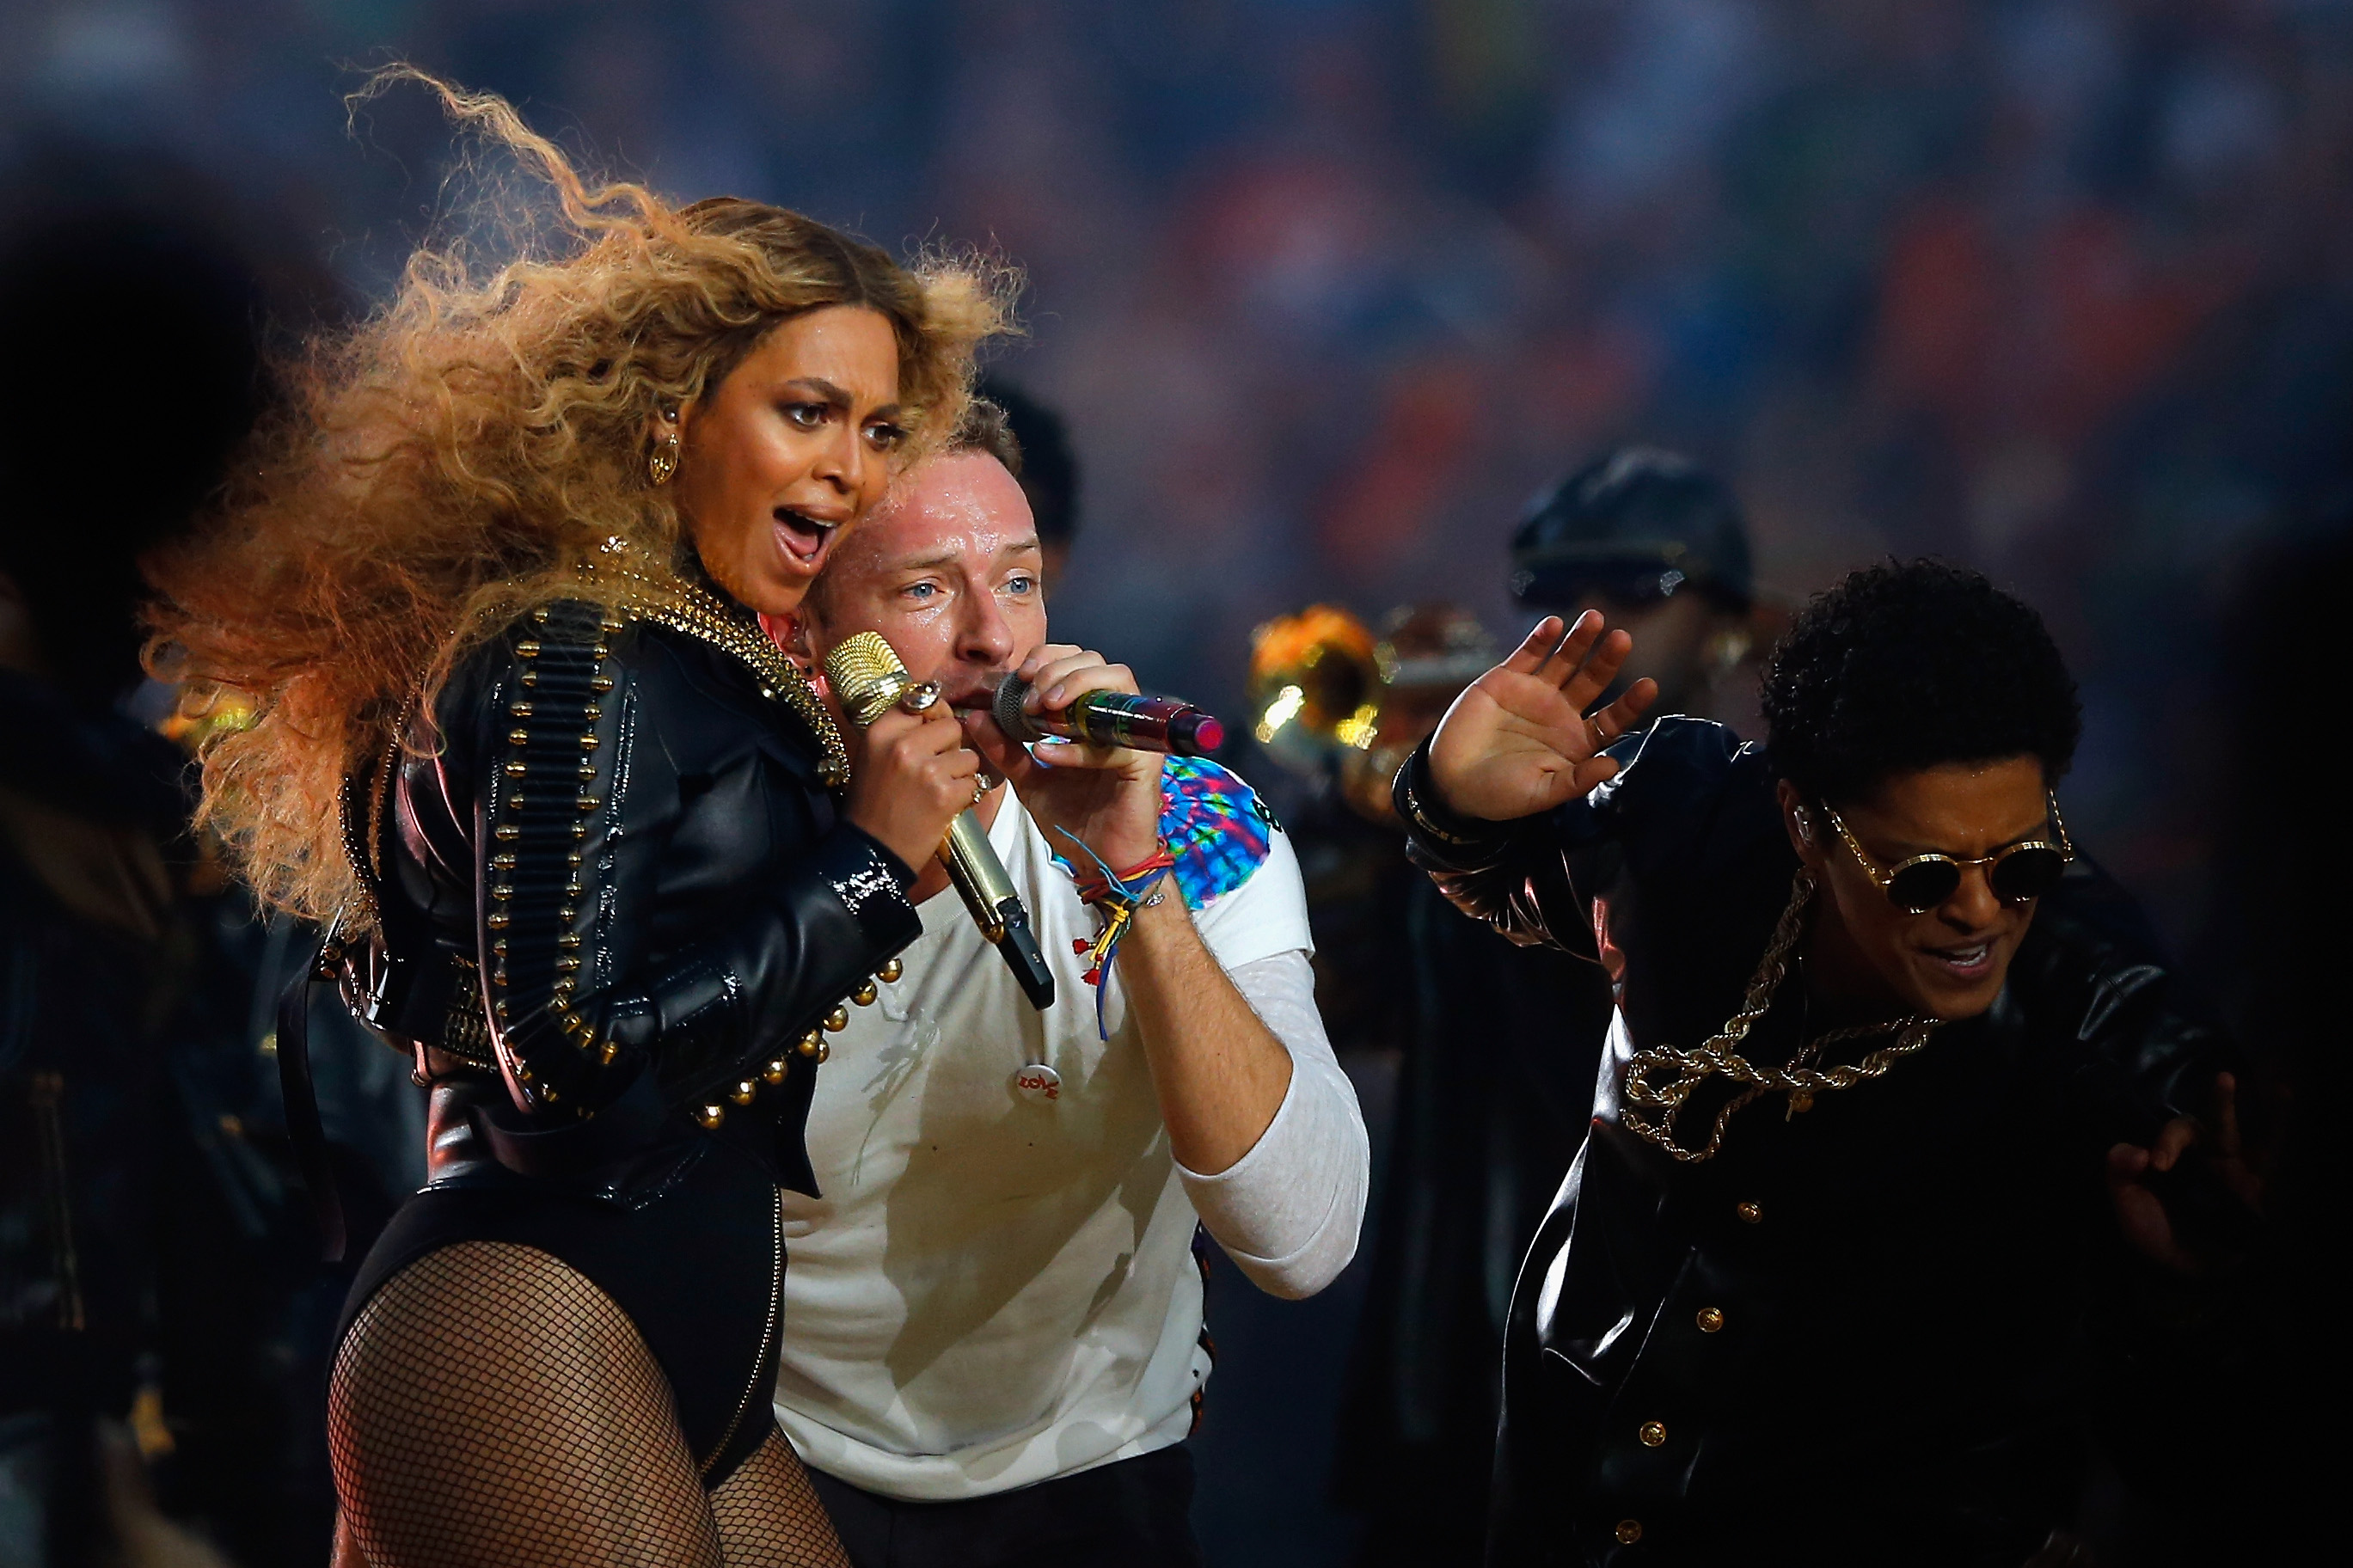 Beyonce during the Pepsi Super Bowl 50 Halftime Show at Levi's Stadium on February 7, 2016 in Santa Clara, California. (Getty Images)